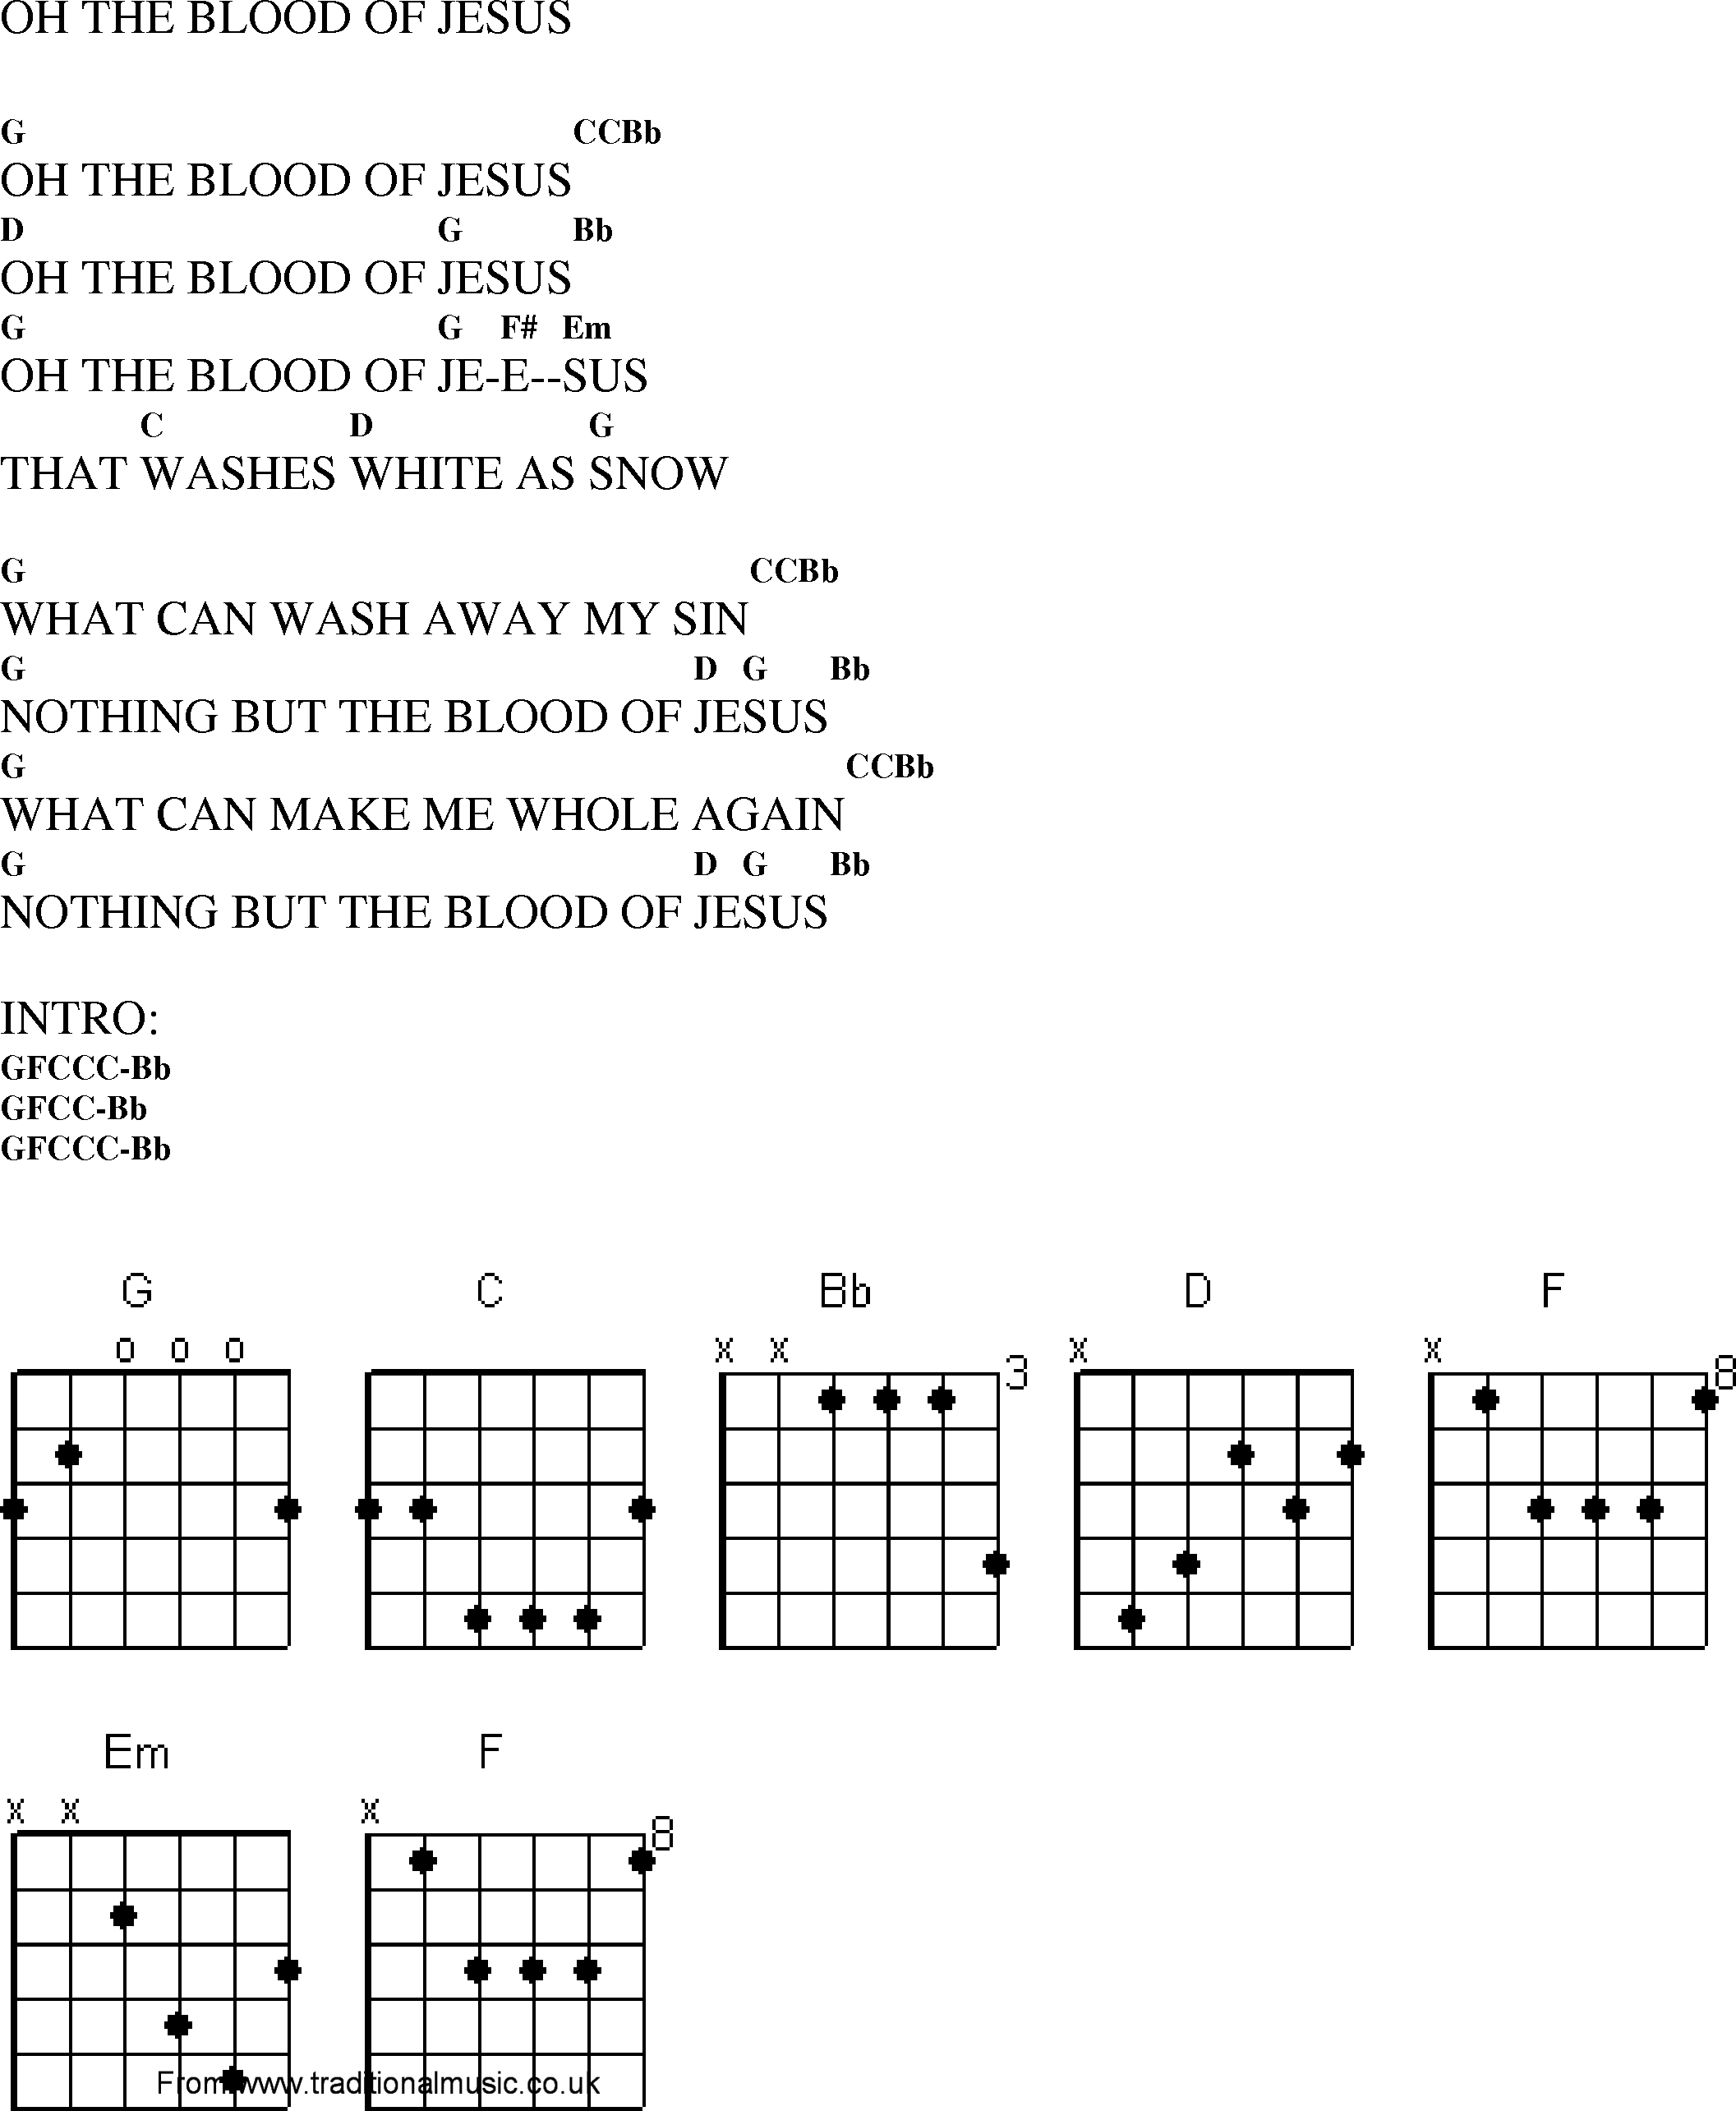 Gospel Song: oh_the_blood_of_jesus, lyrics and chords.